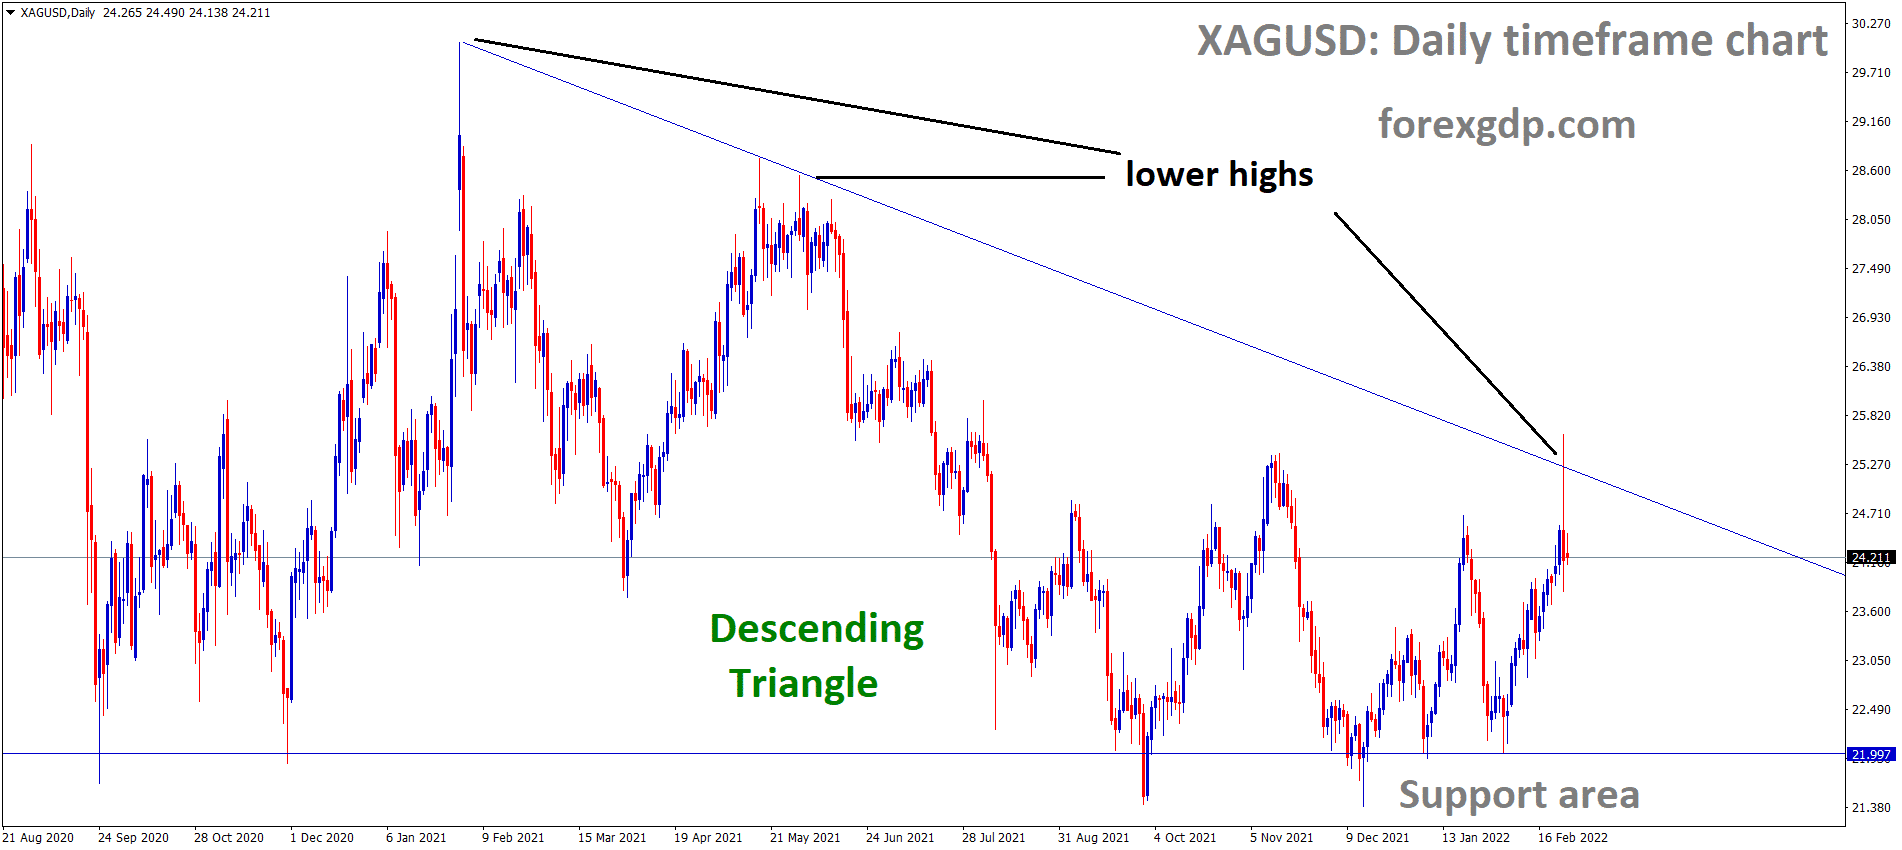 XAGUSD Silver Price is moving in the Descending triangle pattern and the market has fallen from the lower high area of the pattern.